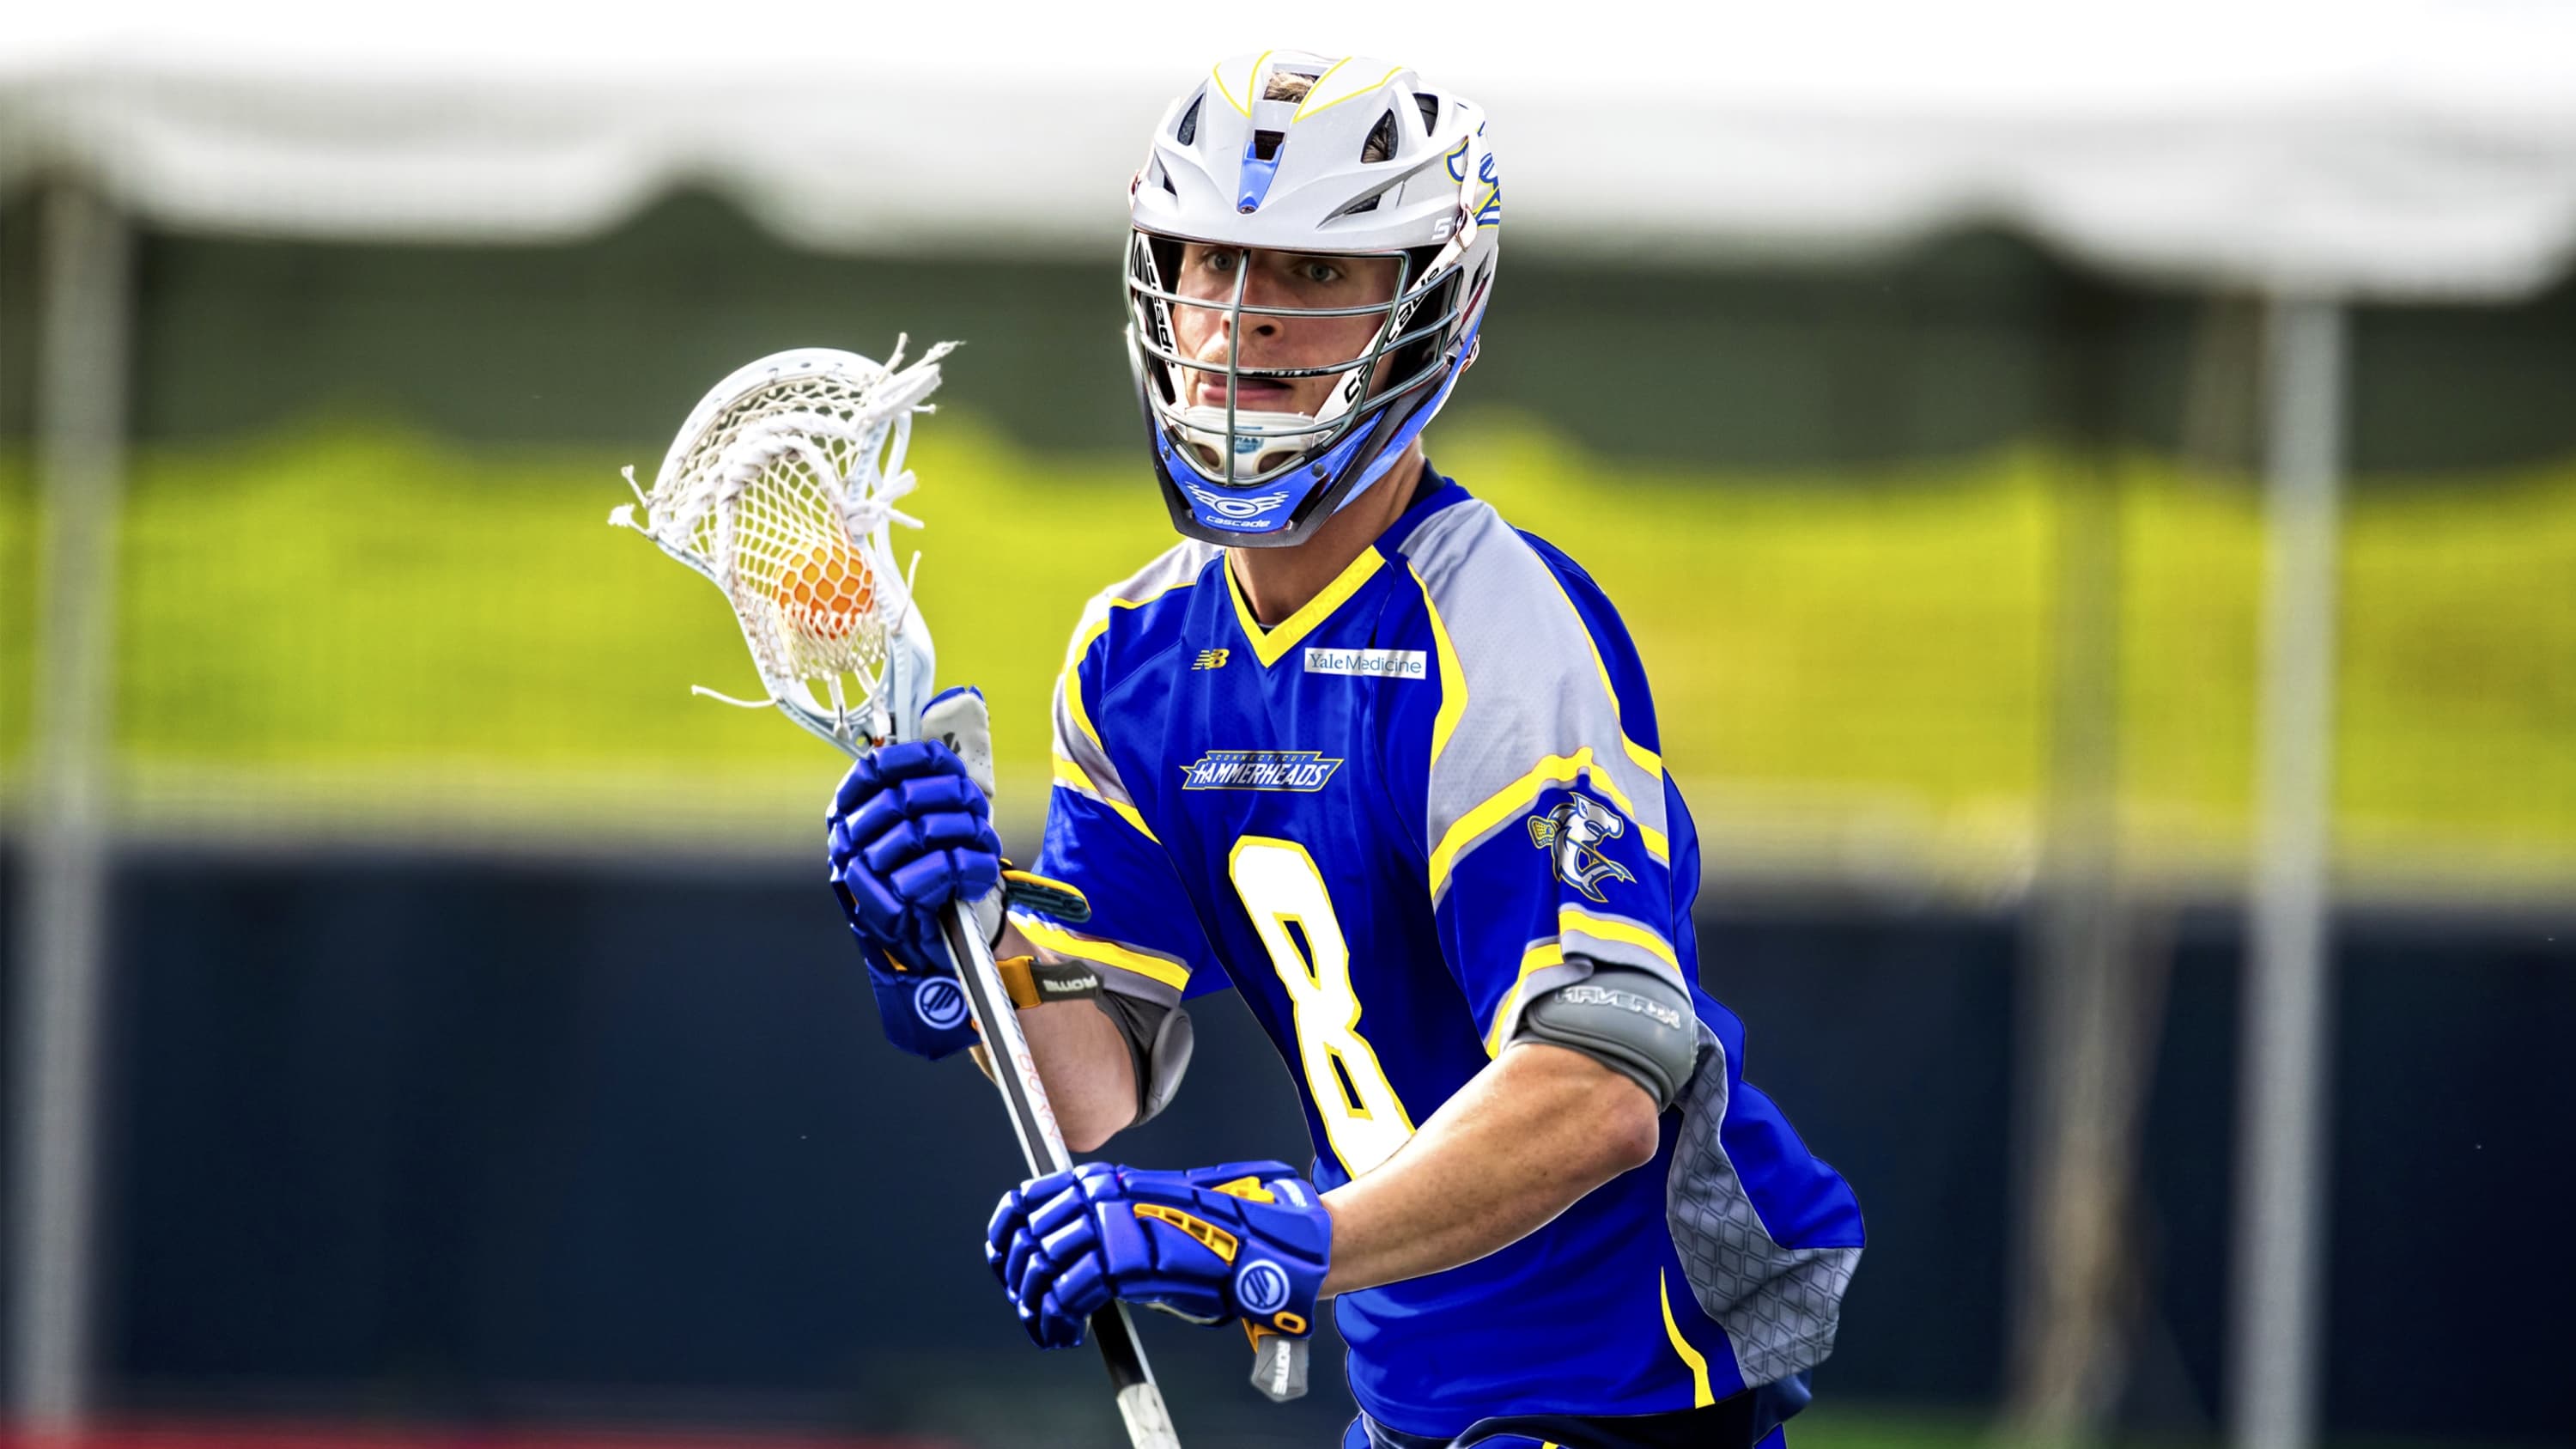 Ryan Beville, a member of the Connecticut Hammerheads lacrosse team